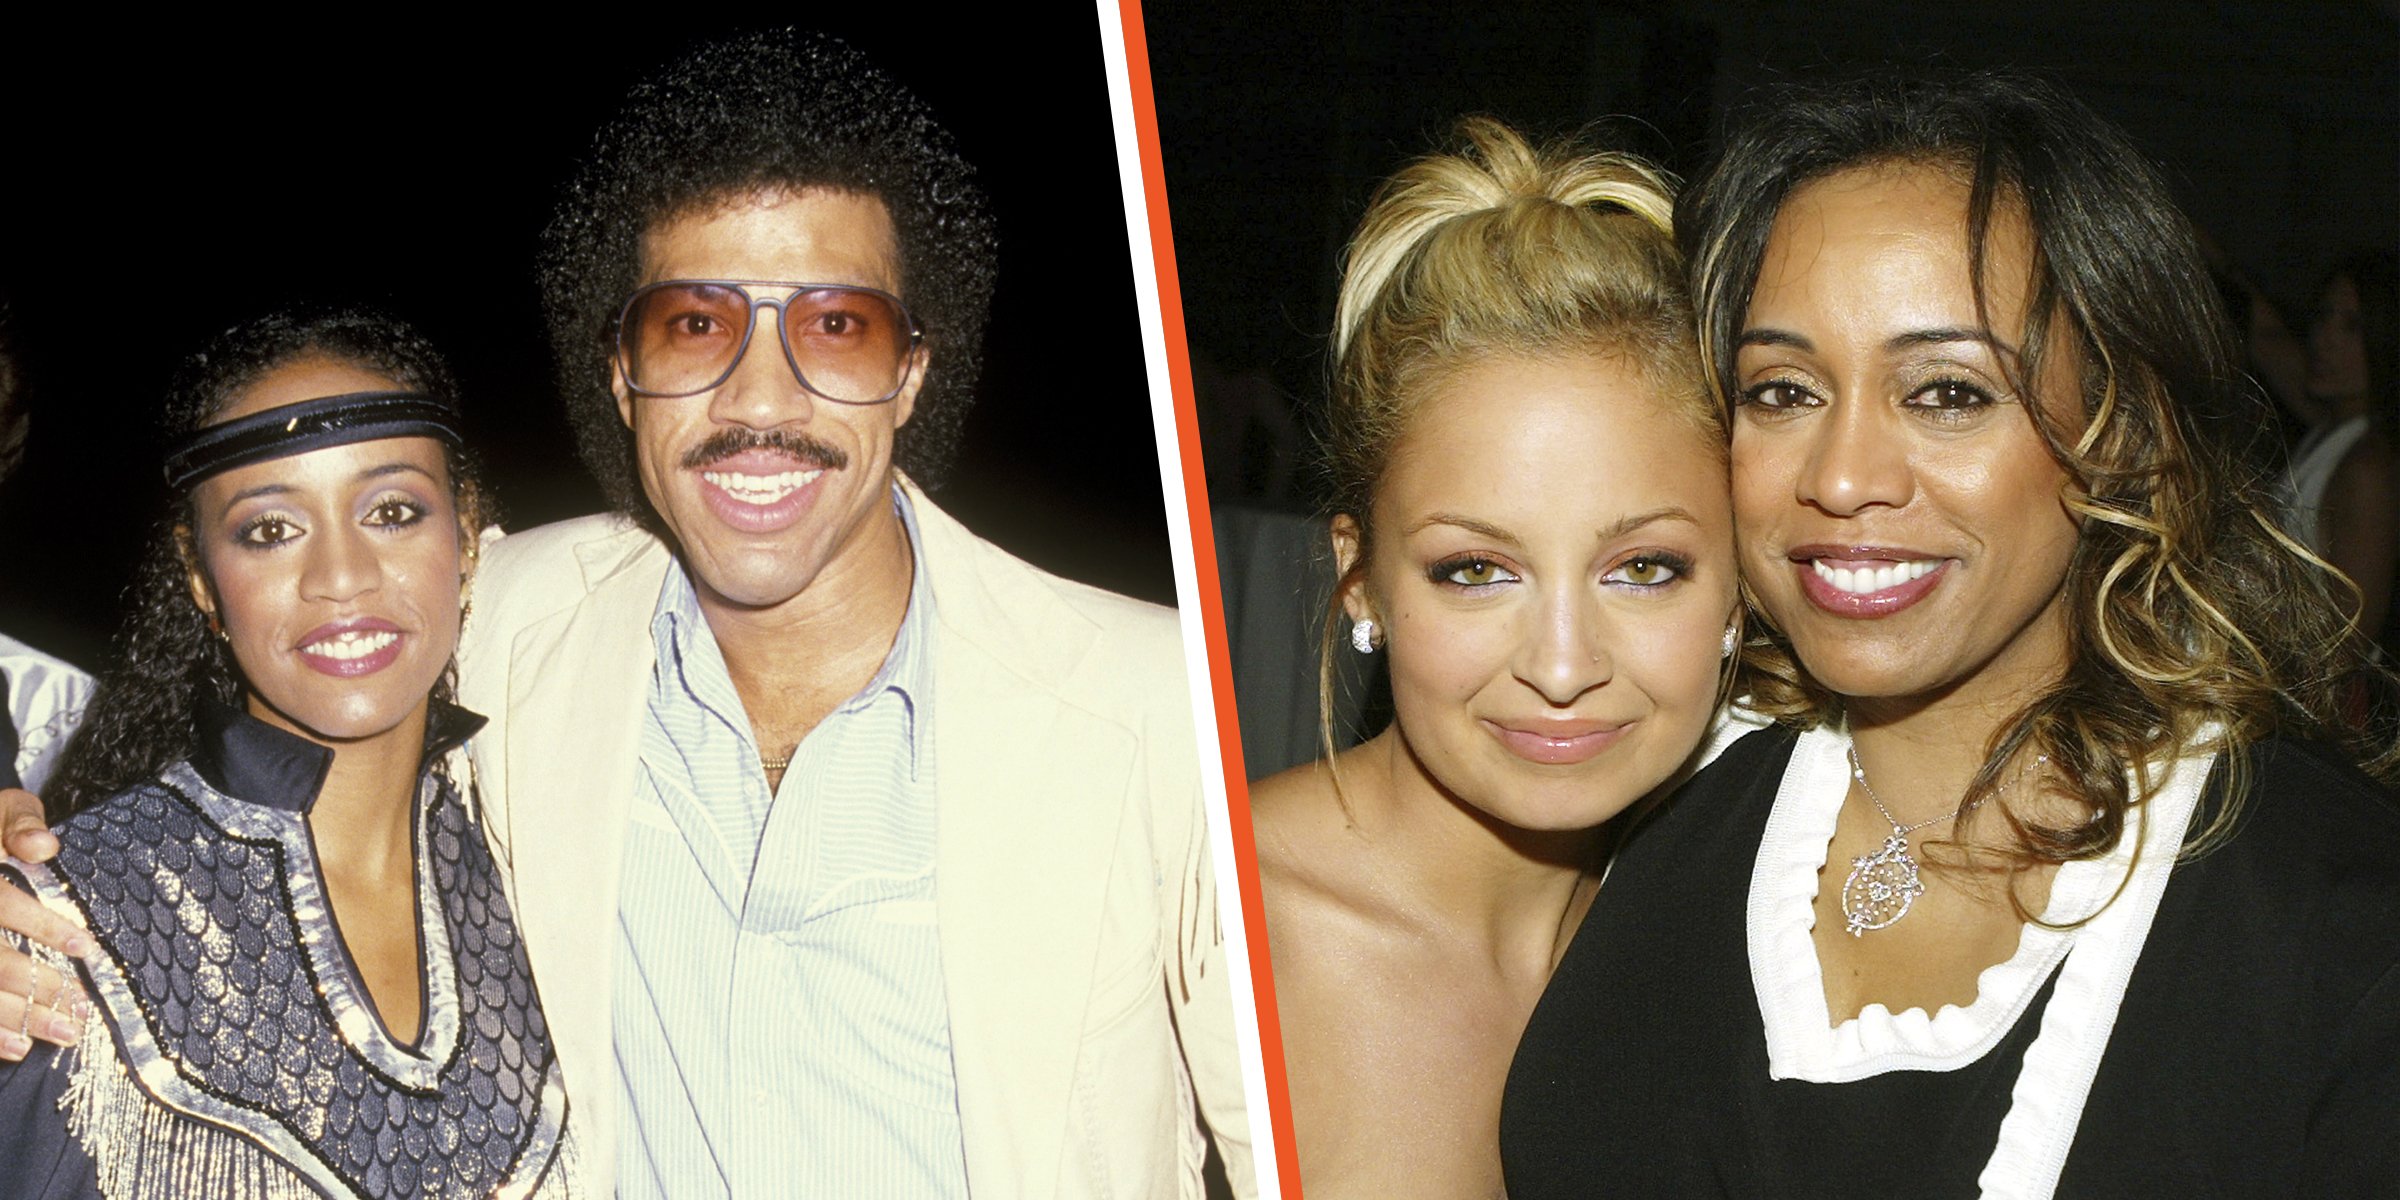 Brenda Harvey-Richie with ex husband Lionel Richie | Nicole Richie with her mom Brenda Harvey-Richie | Source: Getty Images